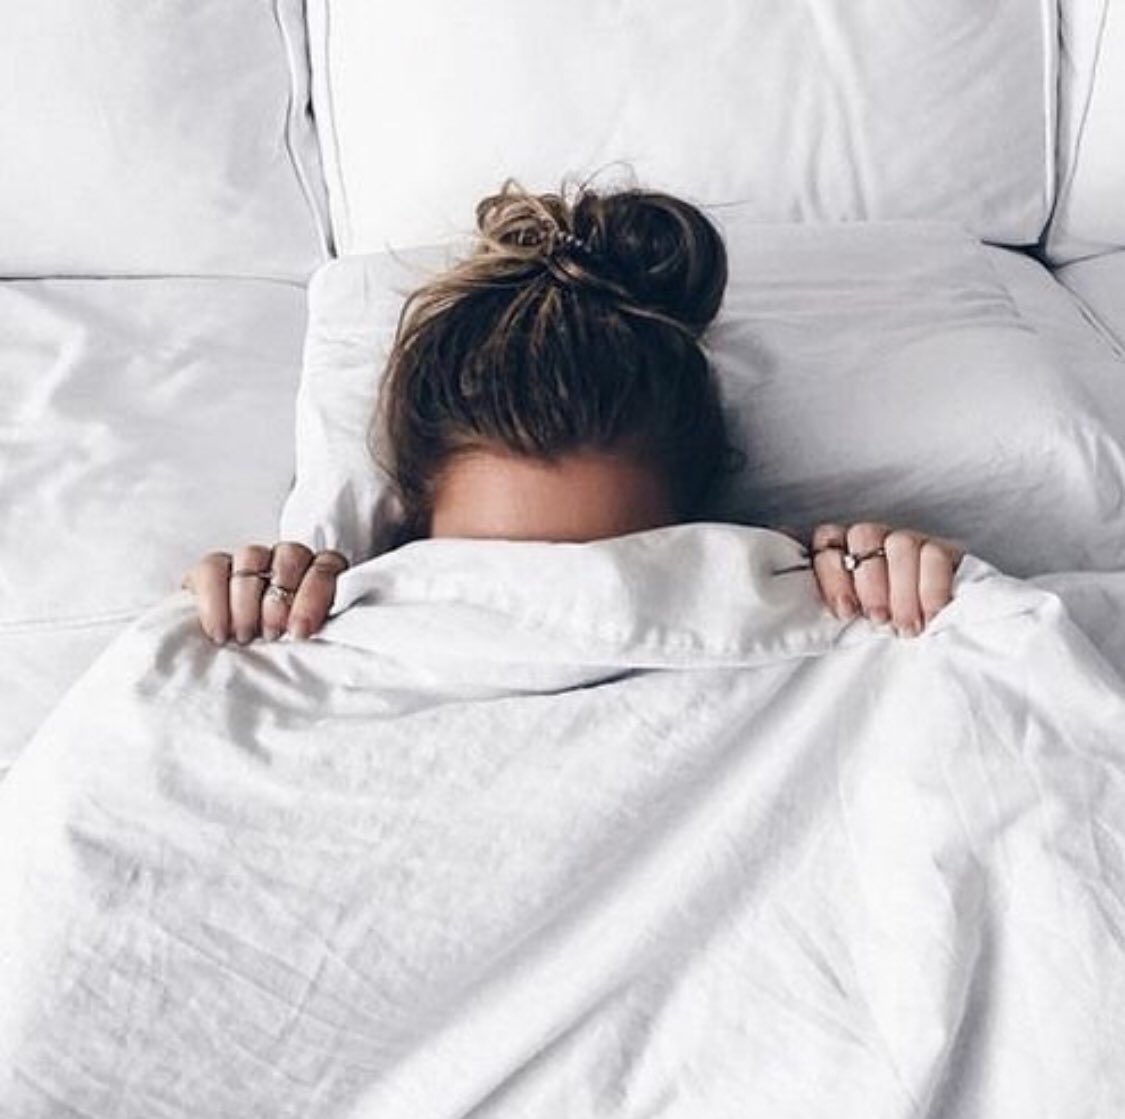 How is it only Wednesday tomorrow! Looking forward to a weekend of 💤 #yanneoofficial
.
.
.
#inspofashion #inspo #alliseeispretty #darlingmovement #embracingaslowerlife #aslowmoment #thelifestyle #thehappynow #theartofslowliving #thesimpleeveryday